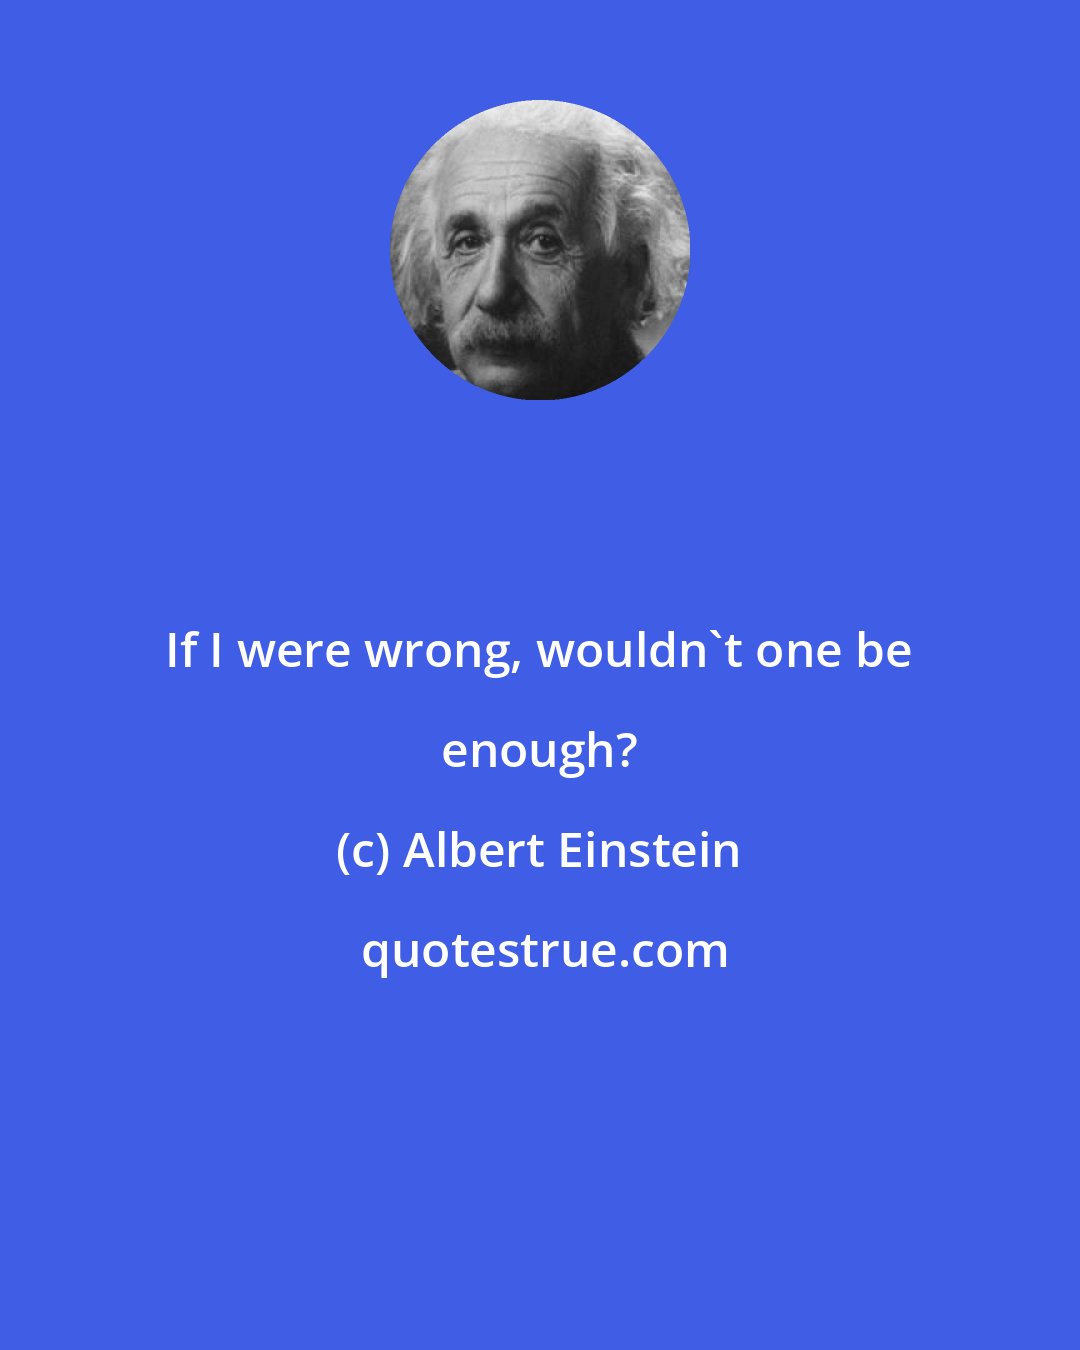 Albert Einstein: If I were wrong, wouldn't one be enough?